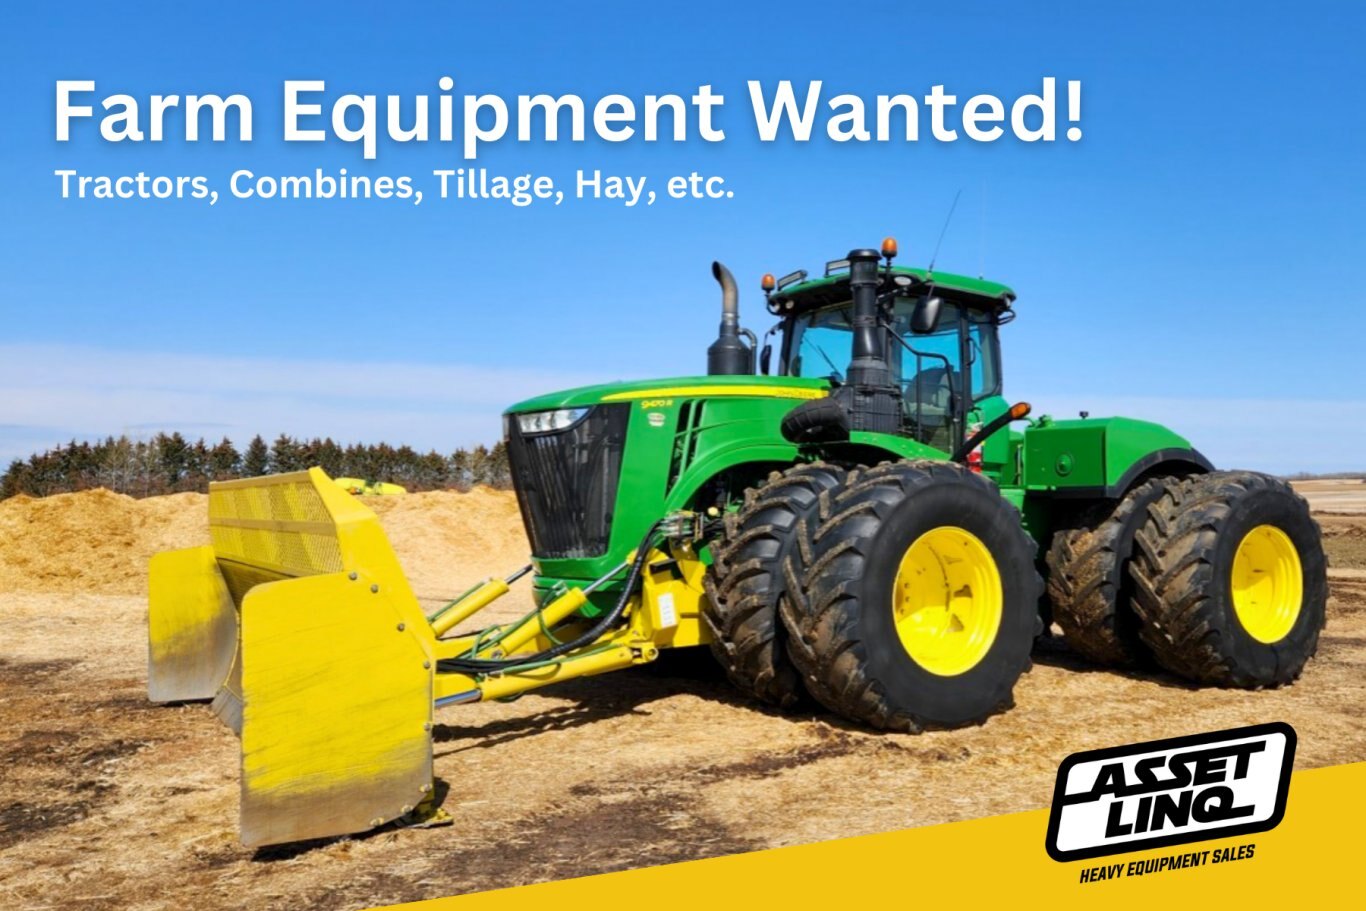 We Want Your Equipment!